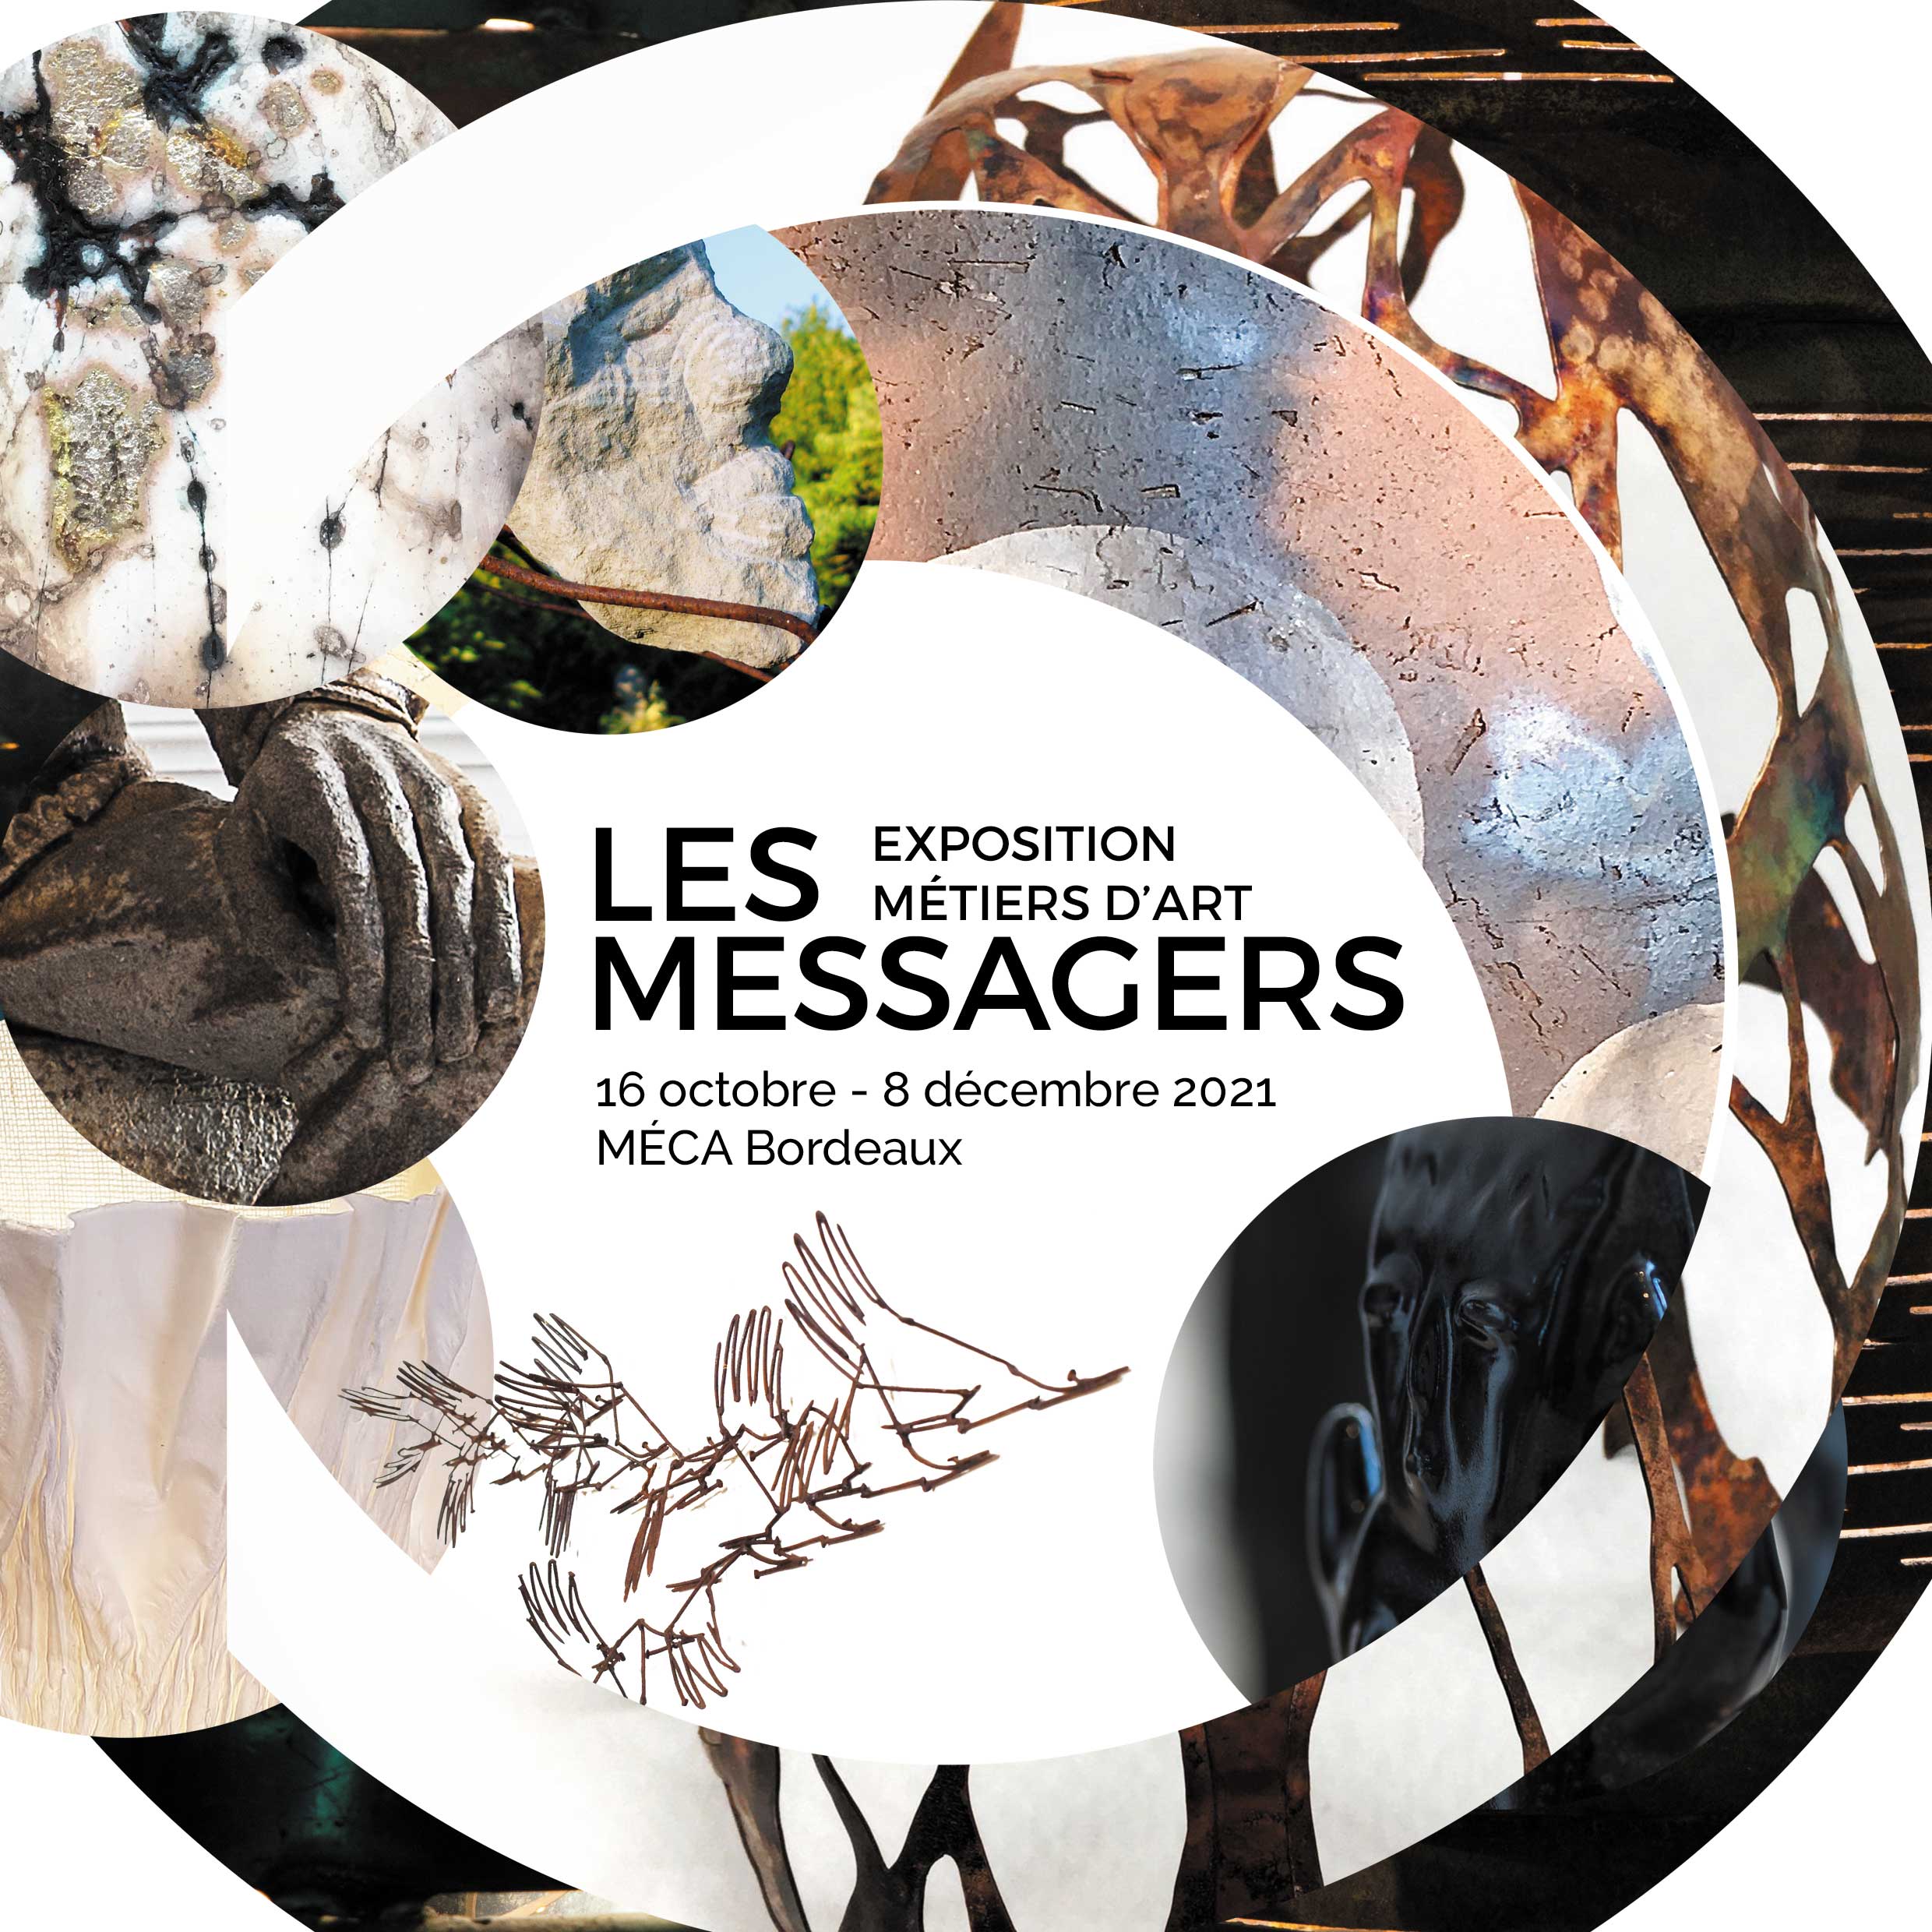 « Les Messagers » – Exhibition in the MECA in Bordeaux